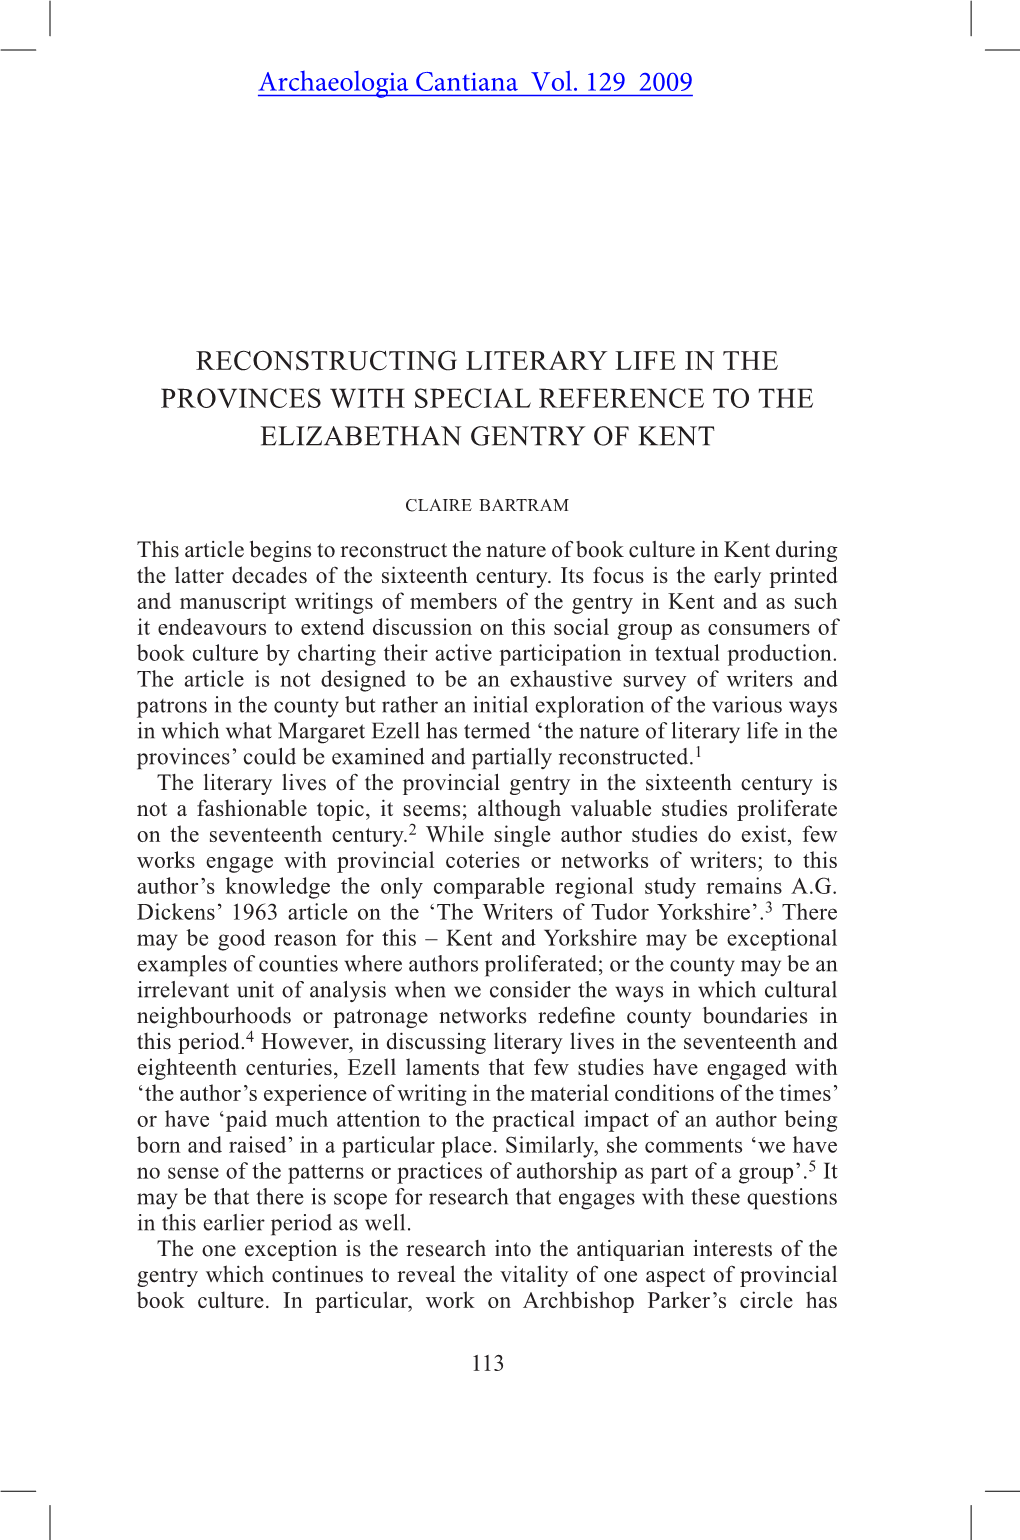 Reconstructing Literary Life in the Provinces with Special Reference to the Elizabethan Gentry of Kent